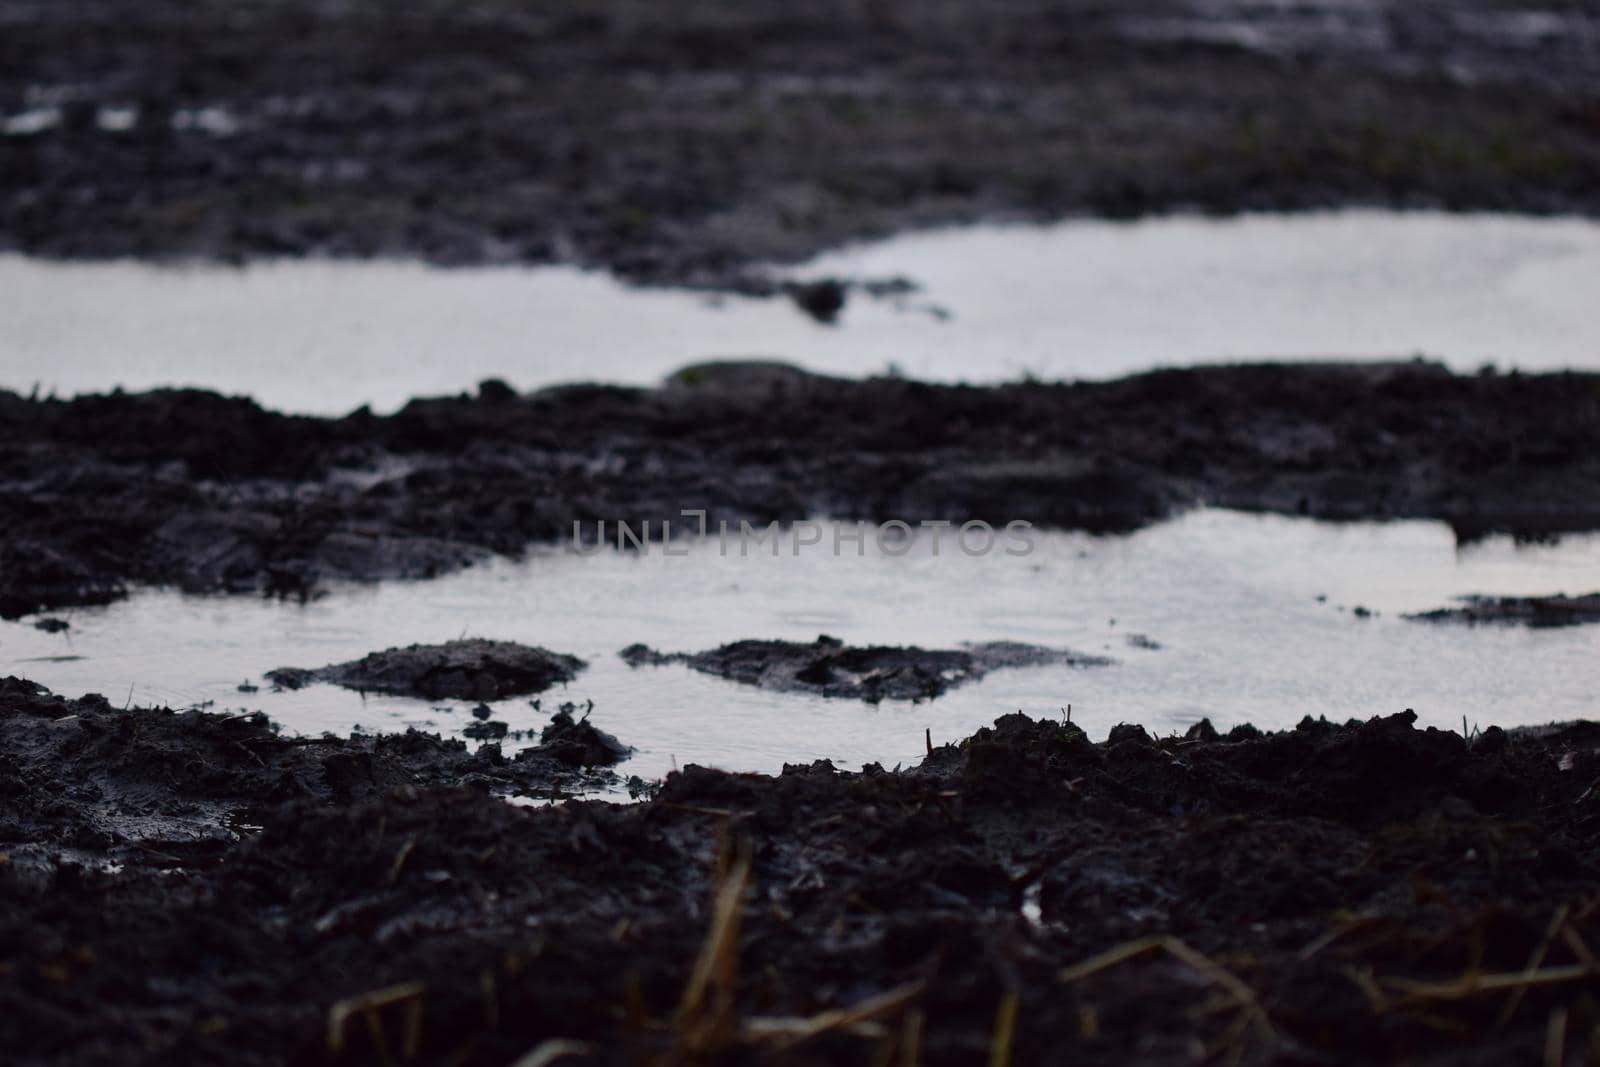 Big puddle on a paddock on a dreary day by Luise123